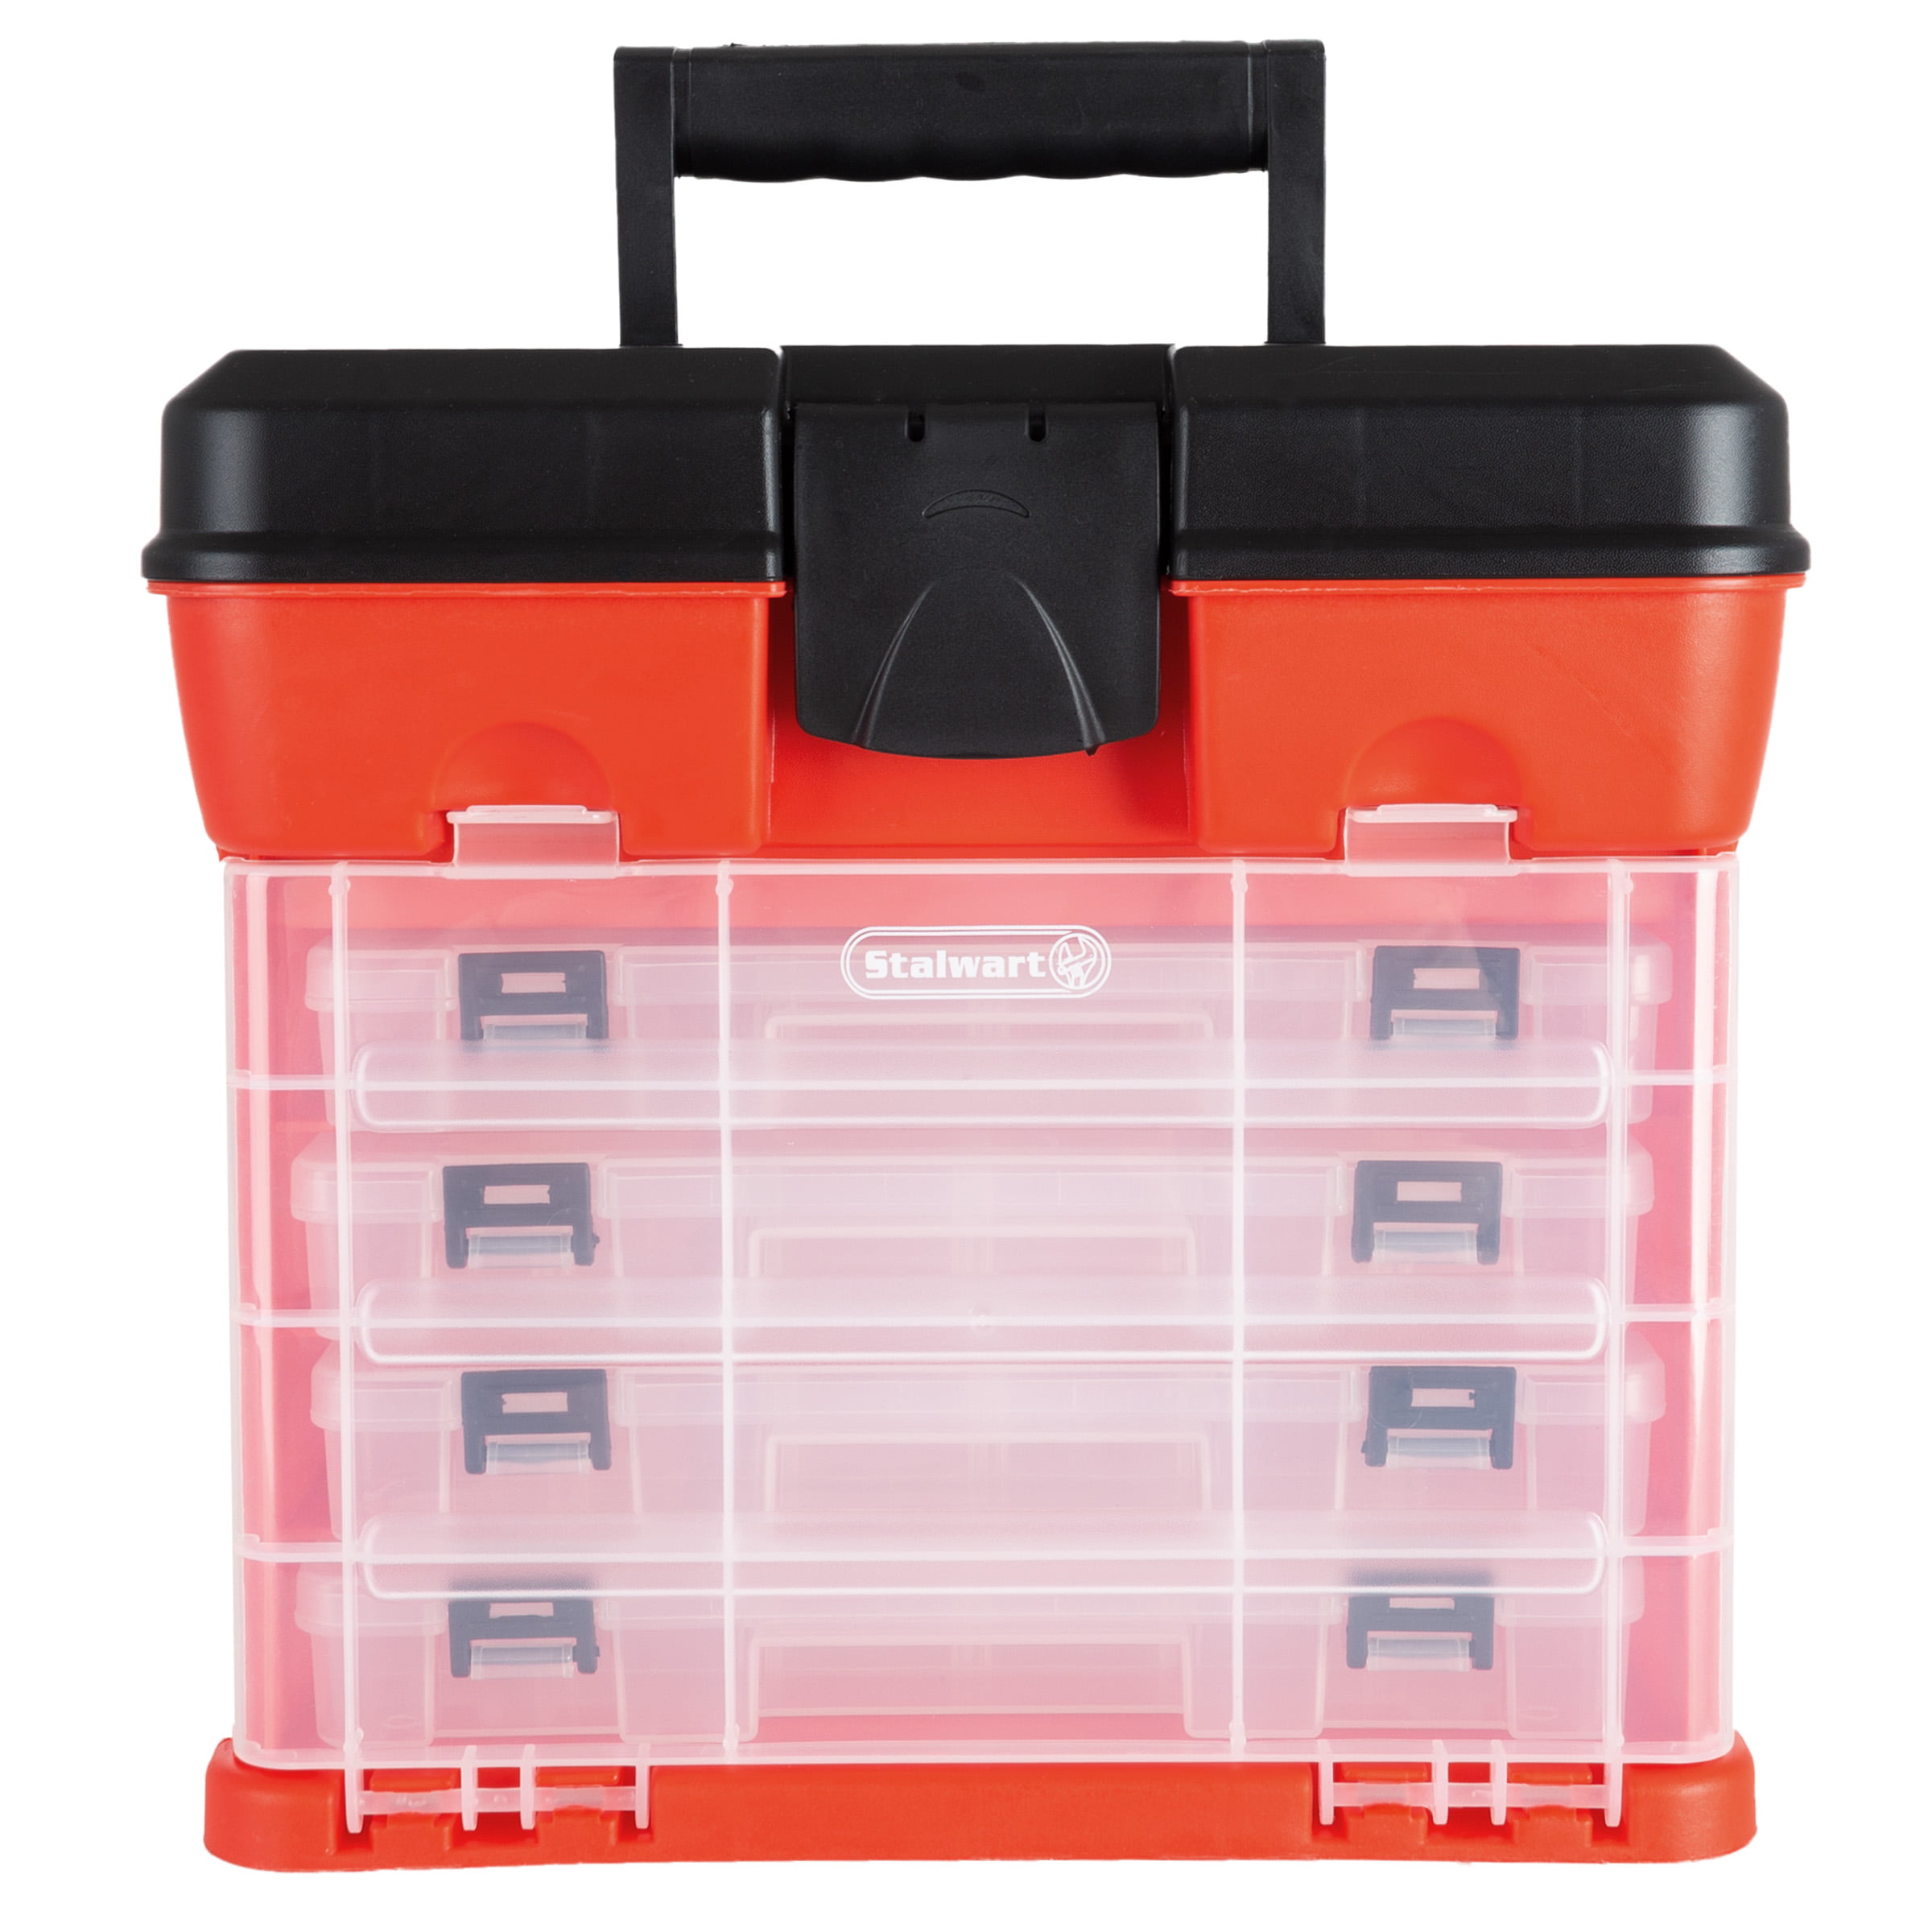 Storage Tool Box - Portable Multipurpose Organizer With Main Top  Compartment and 4 Removable Multi-Compartment Trays by Stalwart,Red,11 in x  7 in x 10